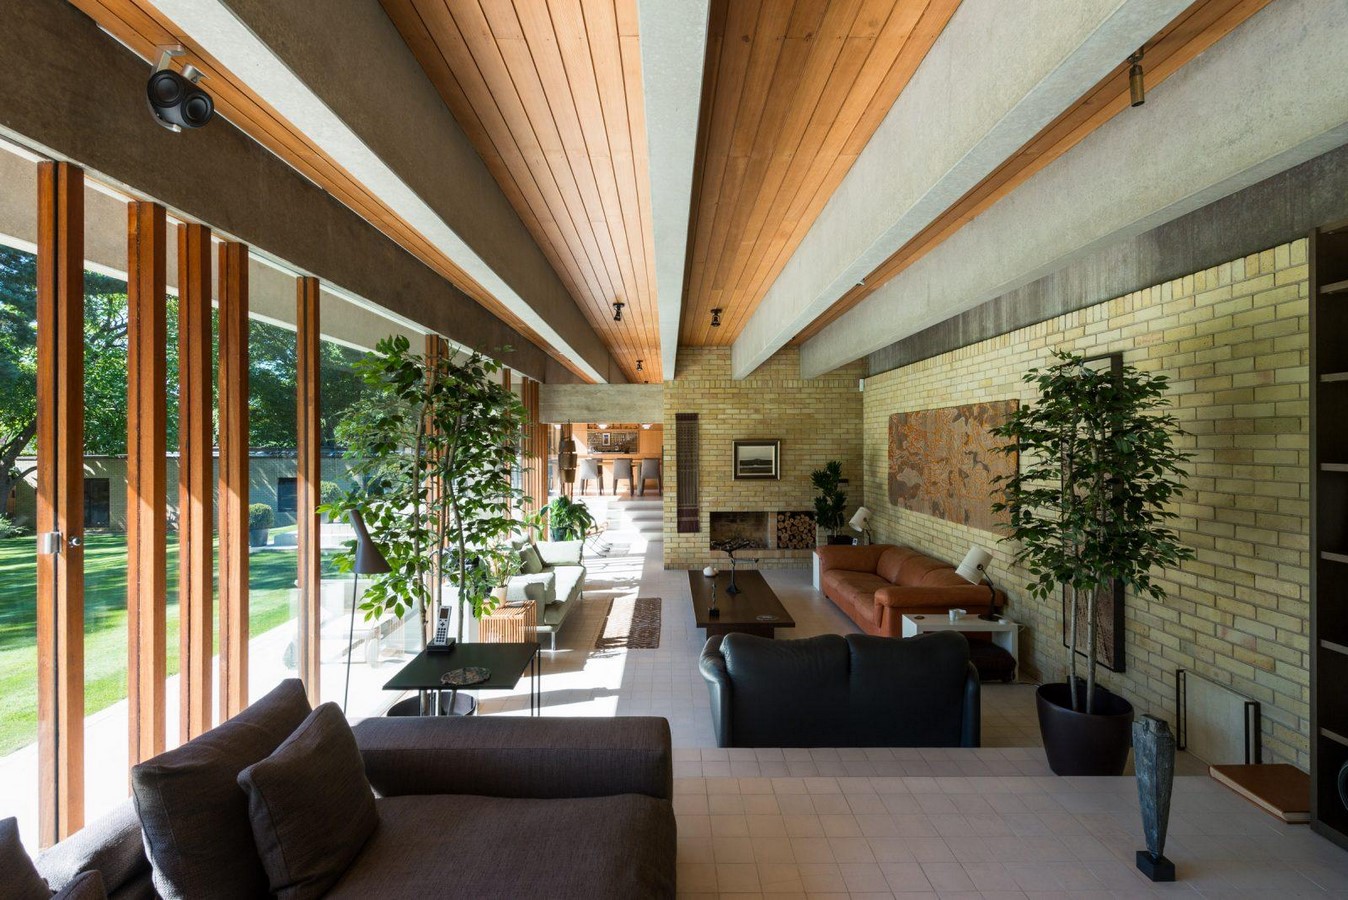 The Ahm House by Jørn Utzon: A Masterfully conceived Building - Sheet6